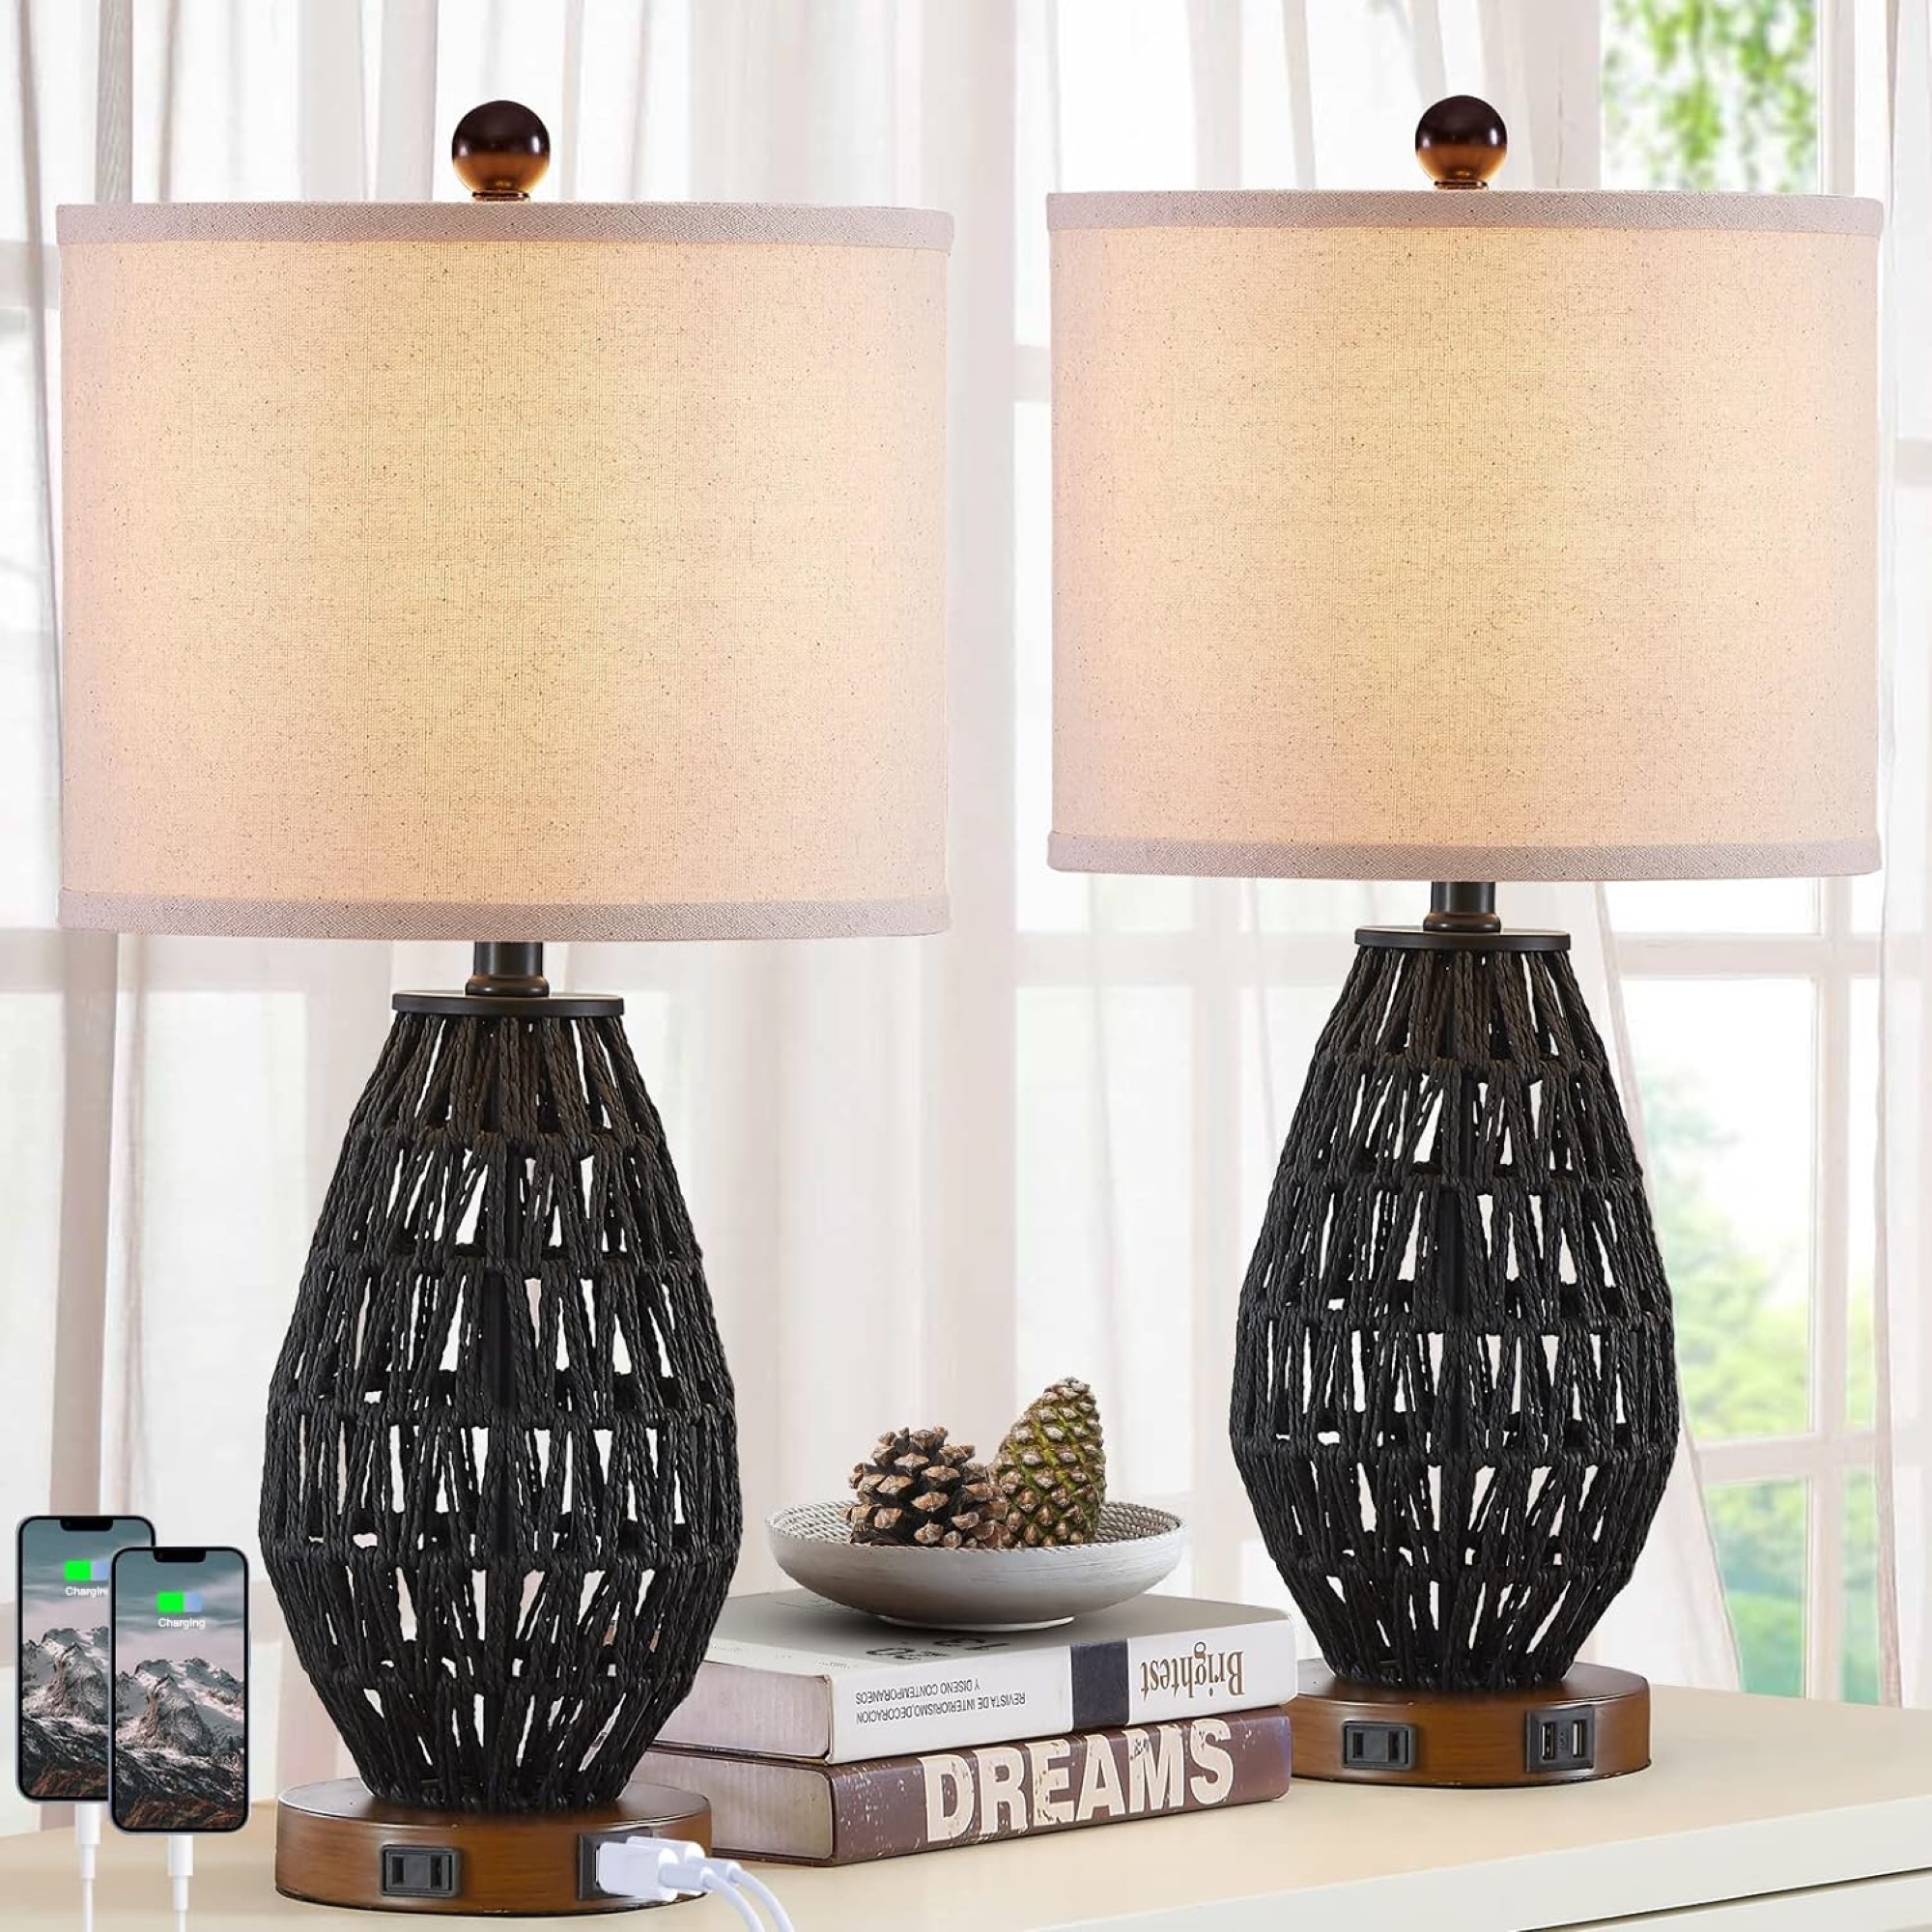 Cinkeda Black Rattan Table Lamp Set of 2 for Living Room Bedroom 3 Way Dimmable Touch Control Bedside Nightstand Lamps with USB Ports AC Outlet(2 Bulb) - image 1 of 8